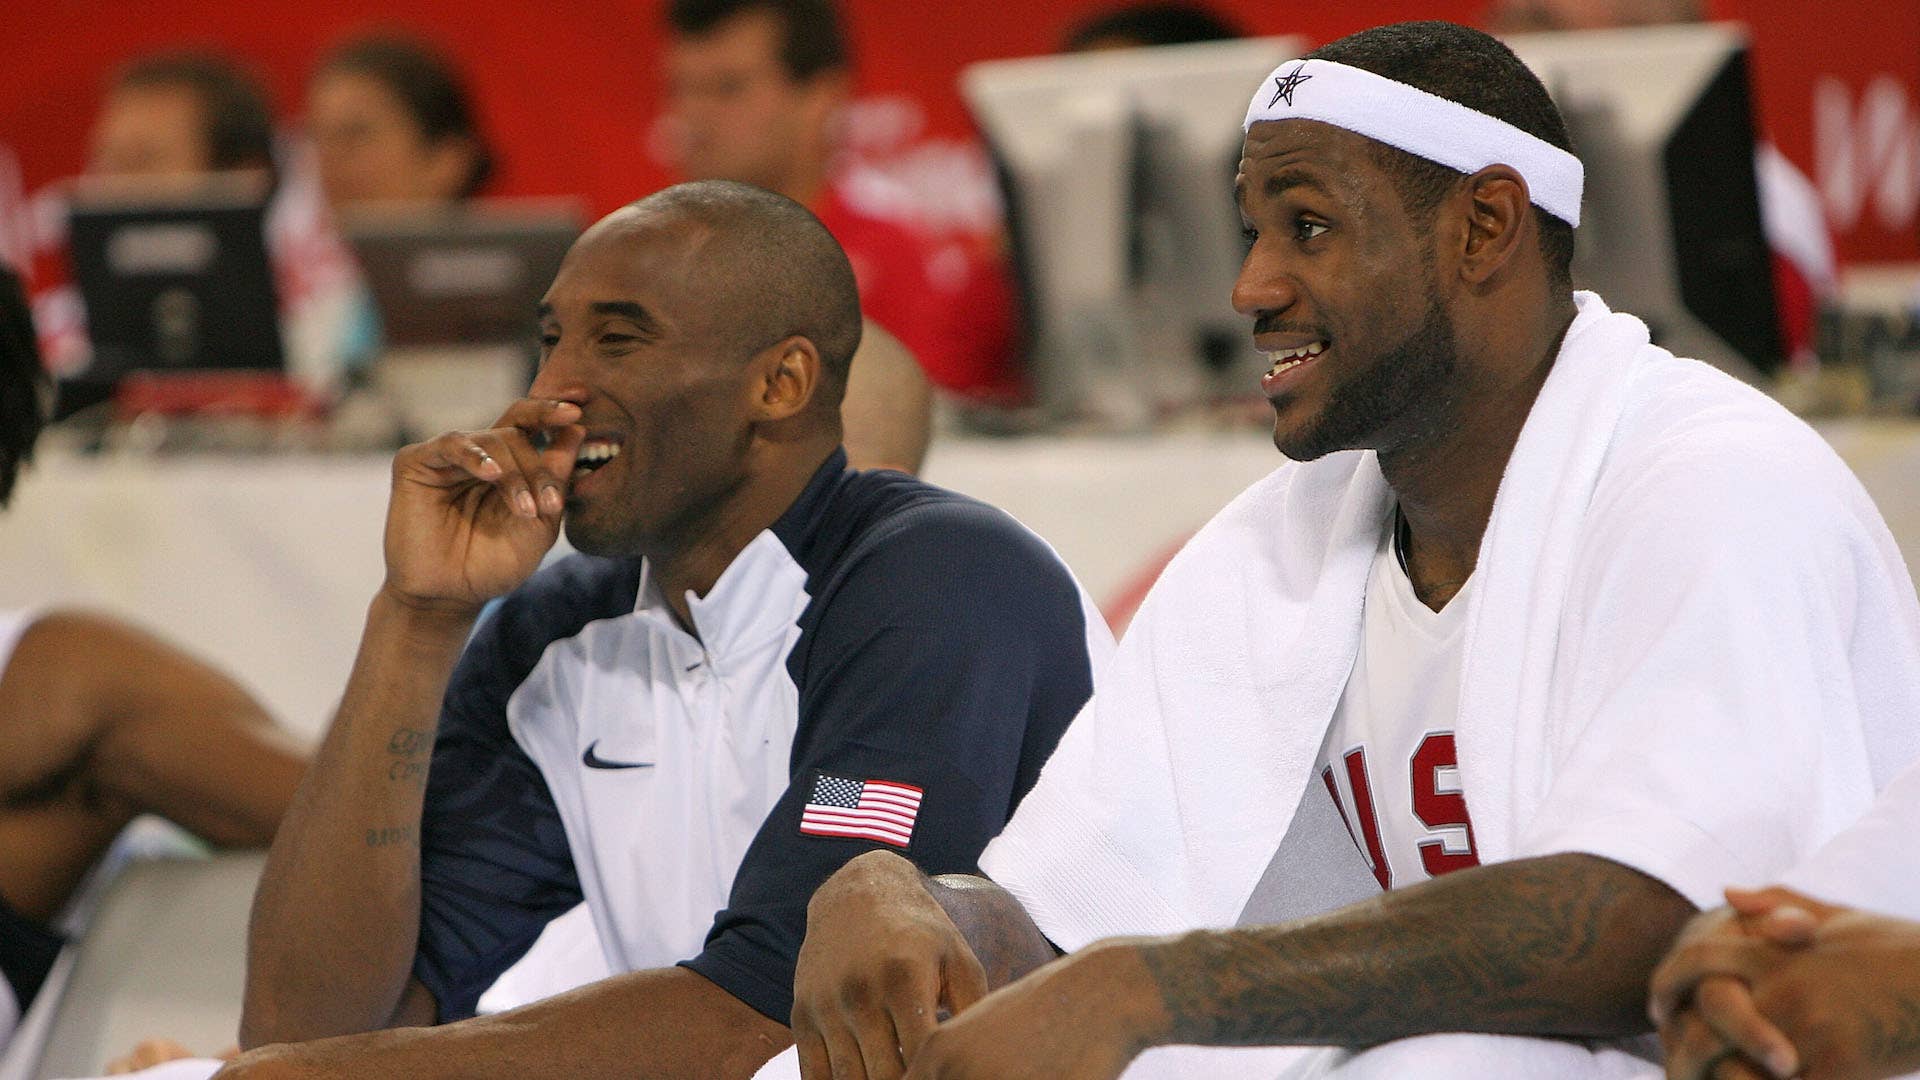 Kobe Bryant #10 and Lebron James #6 of the United States share a laugh on the bench.